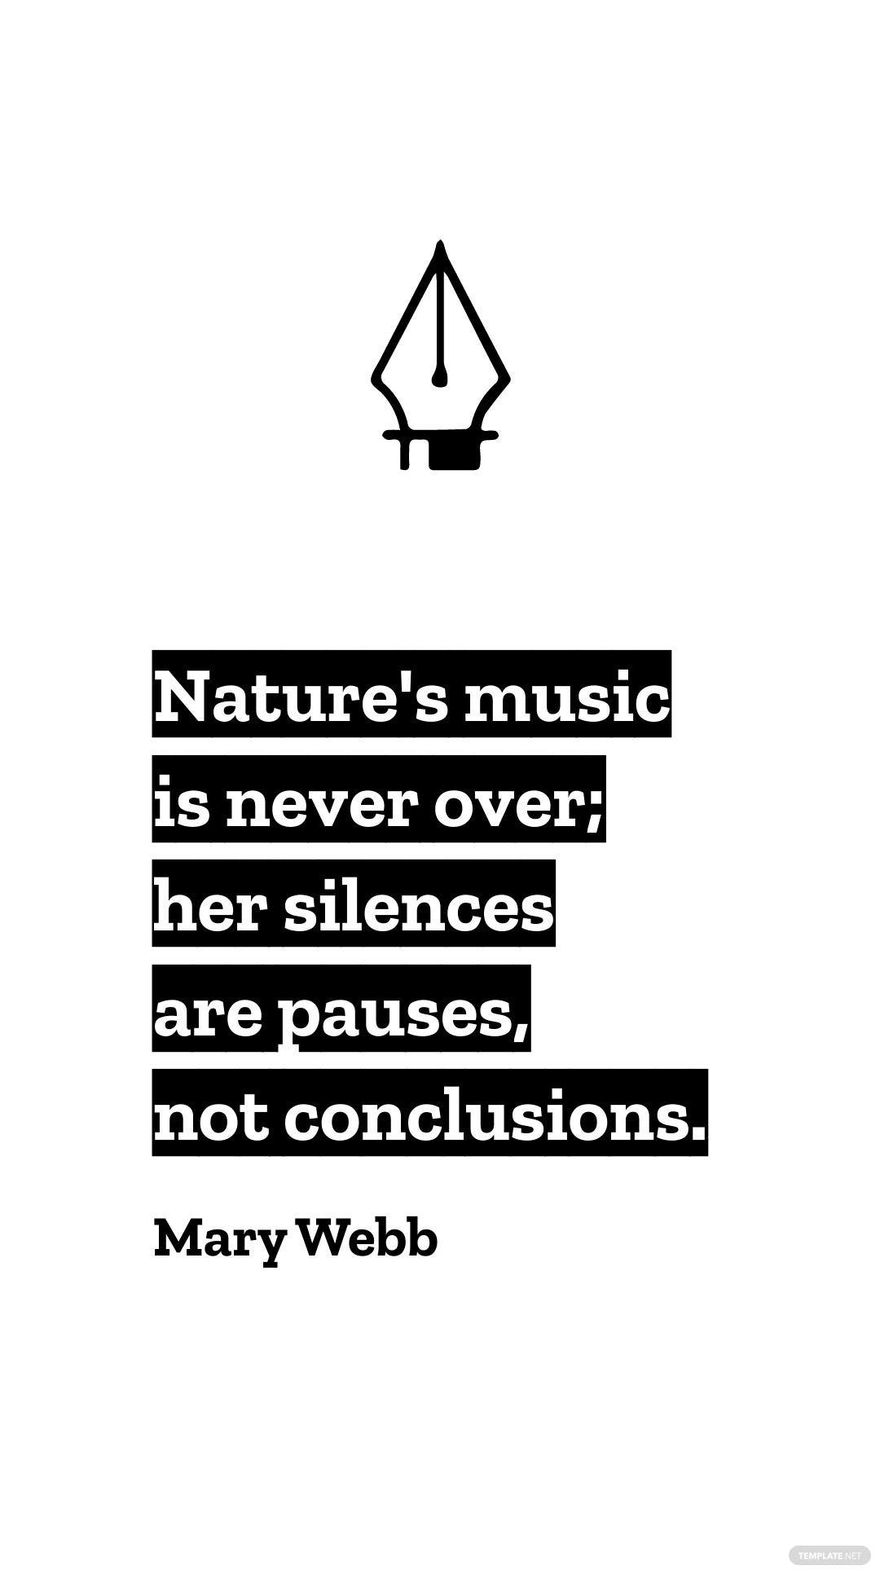 Mary Webb - Nature's music is never over; her silences are pauses, not conclusions.